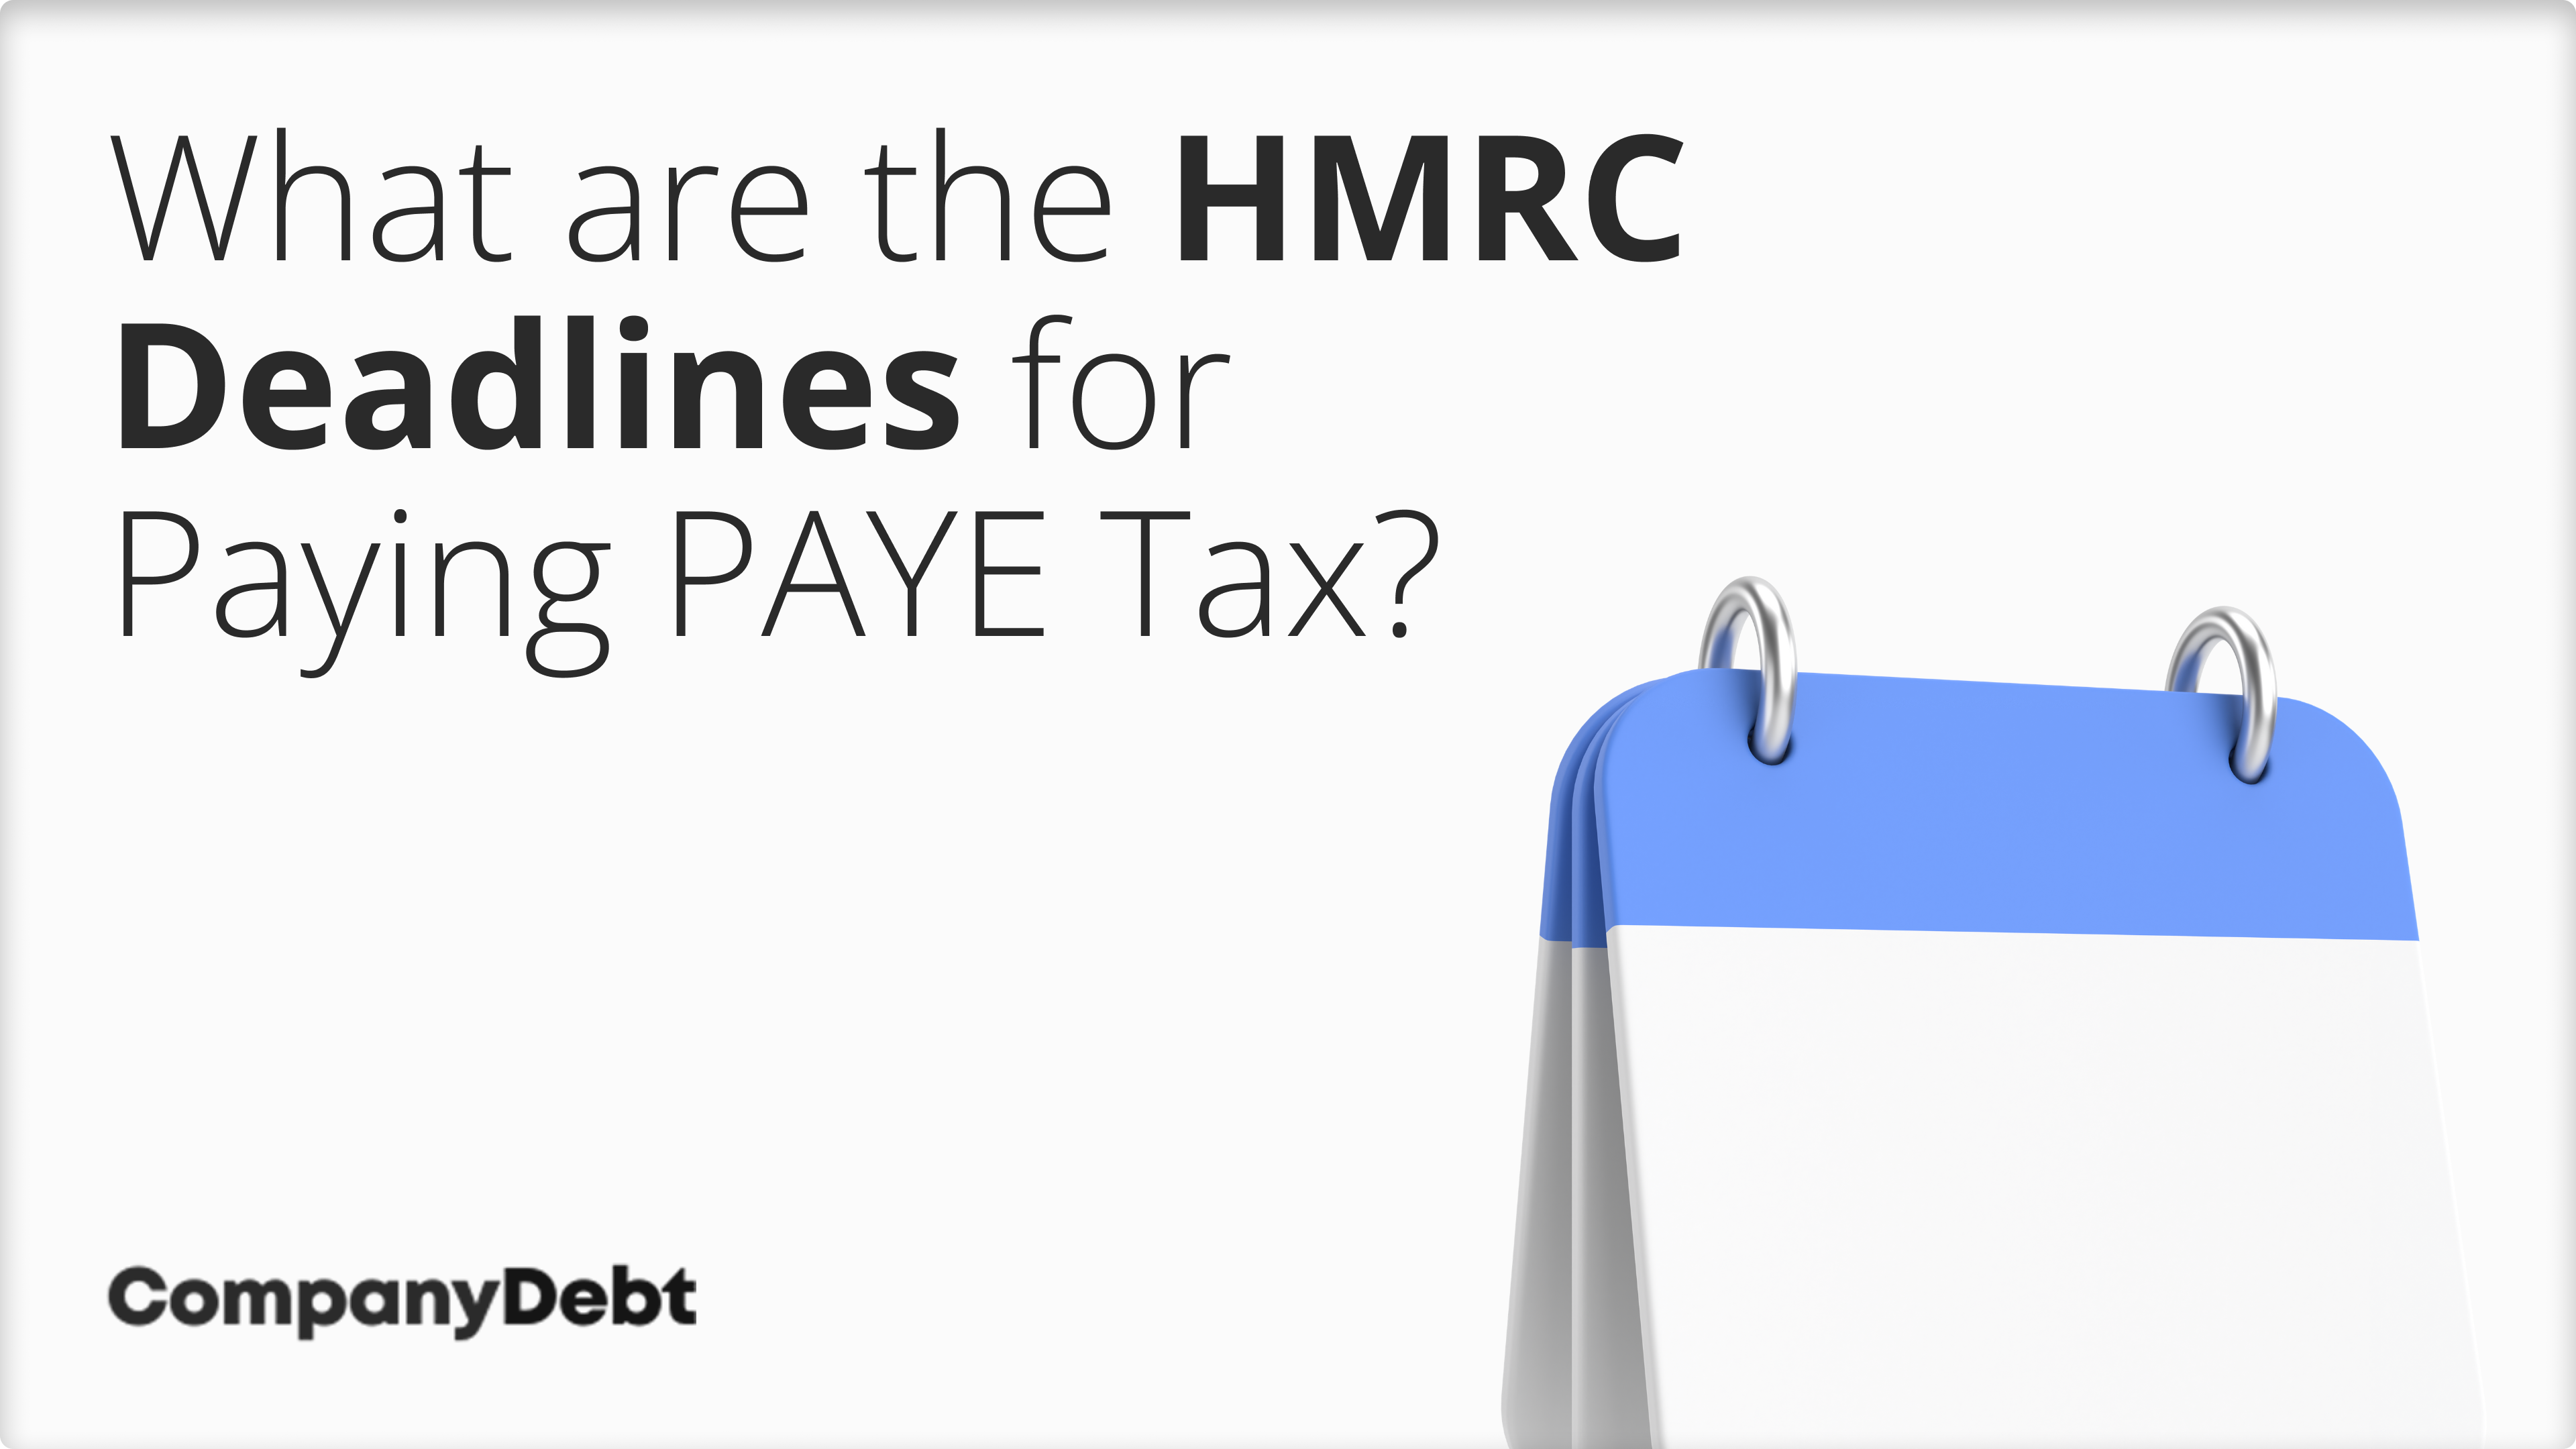 What are the HMRC Deadlines for Paying PAYE Tax?